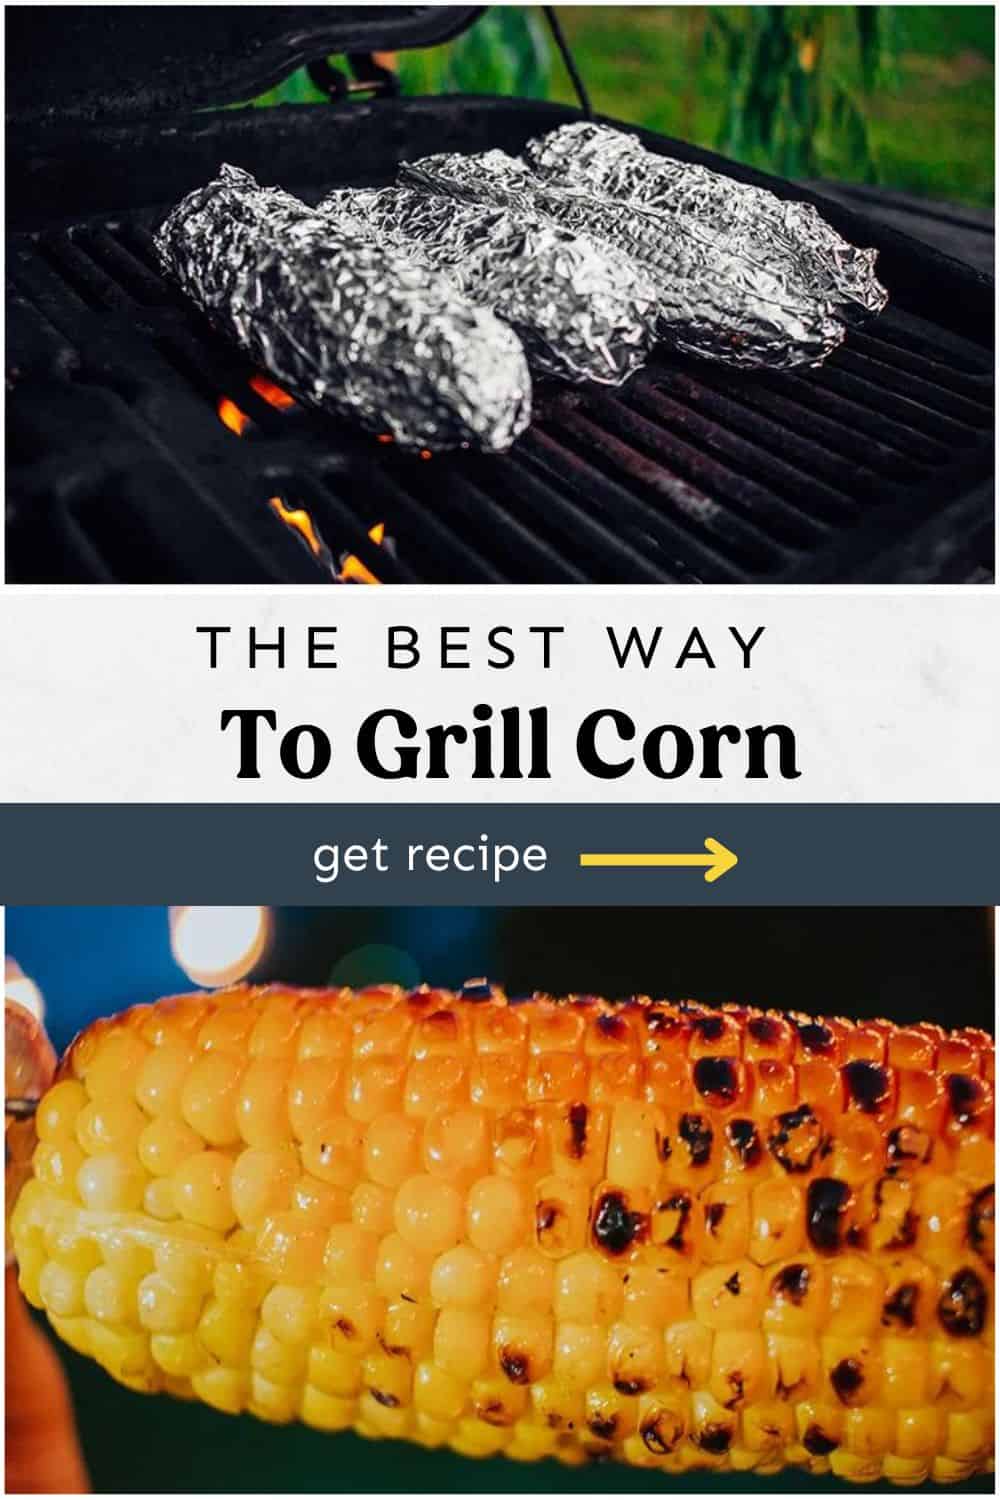 4 ear of corn wrapped in foil on a grill and another photo of charred corn on the cob.